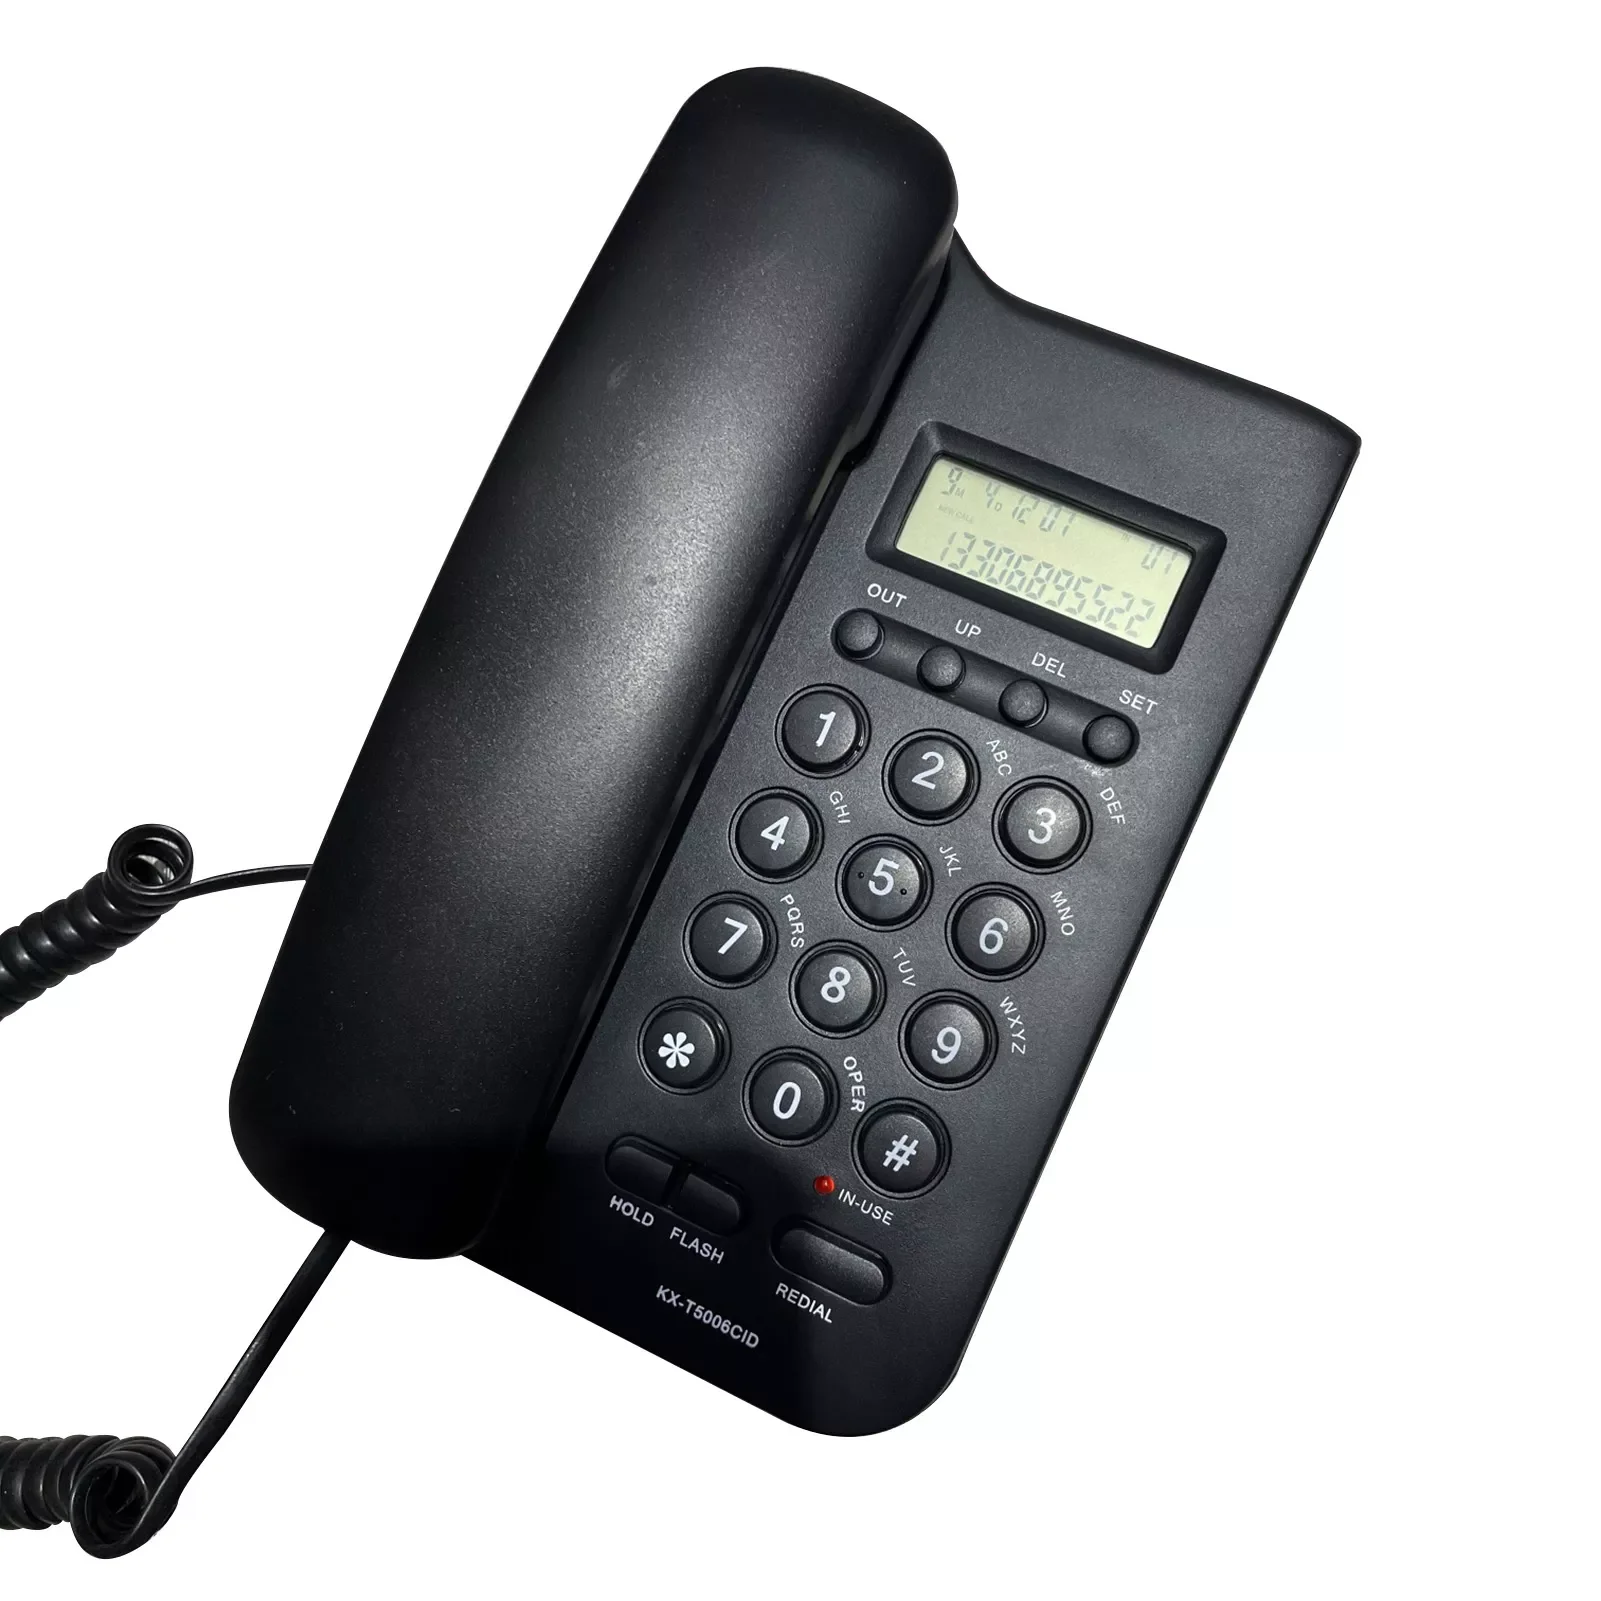 

Hotel Caller ID Hands Free Corded Telephone Loud Sound Home Office With Speaker Landline Wall Mounted FSK DTMF